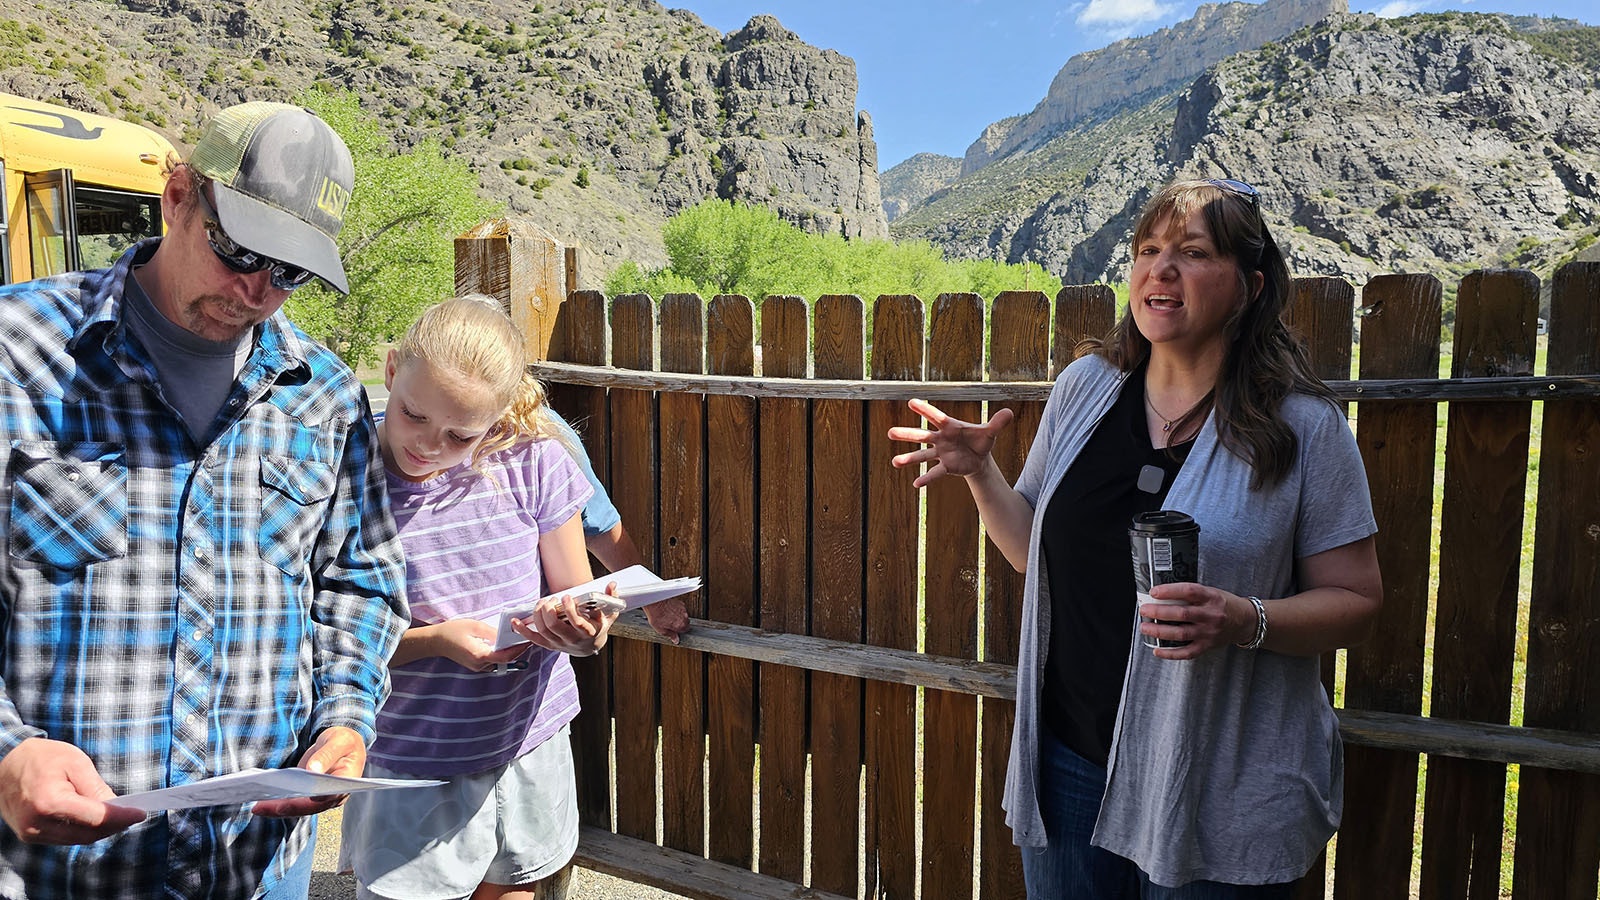 Jackie Dorothy tells stories about constructing Wind River Canyon's scenic byway 100 years ago.